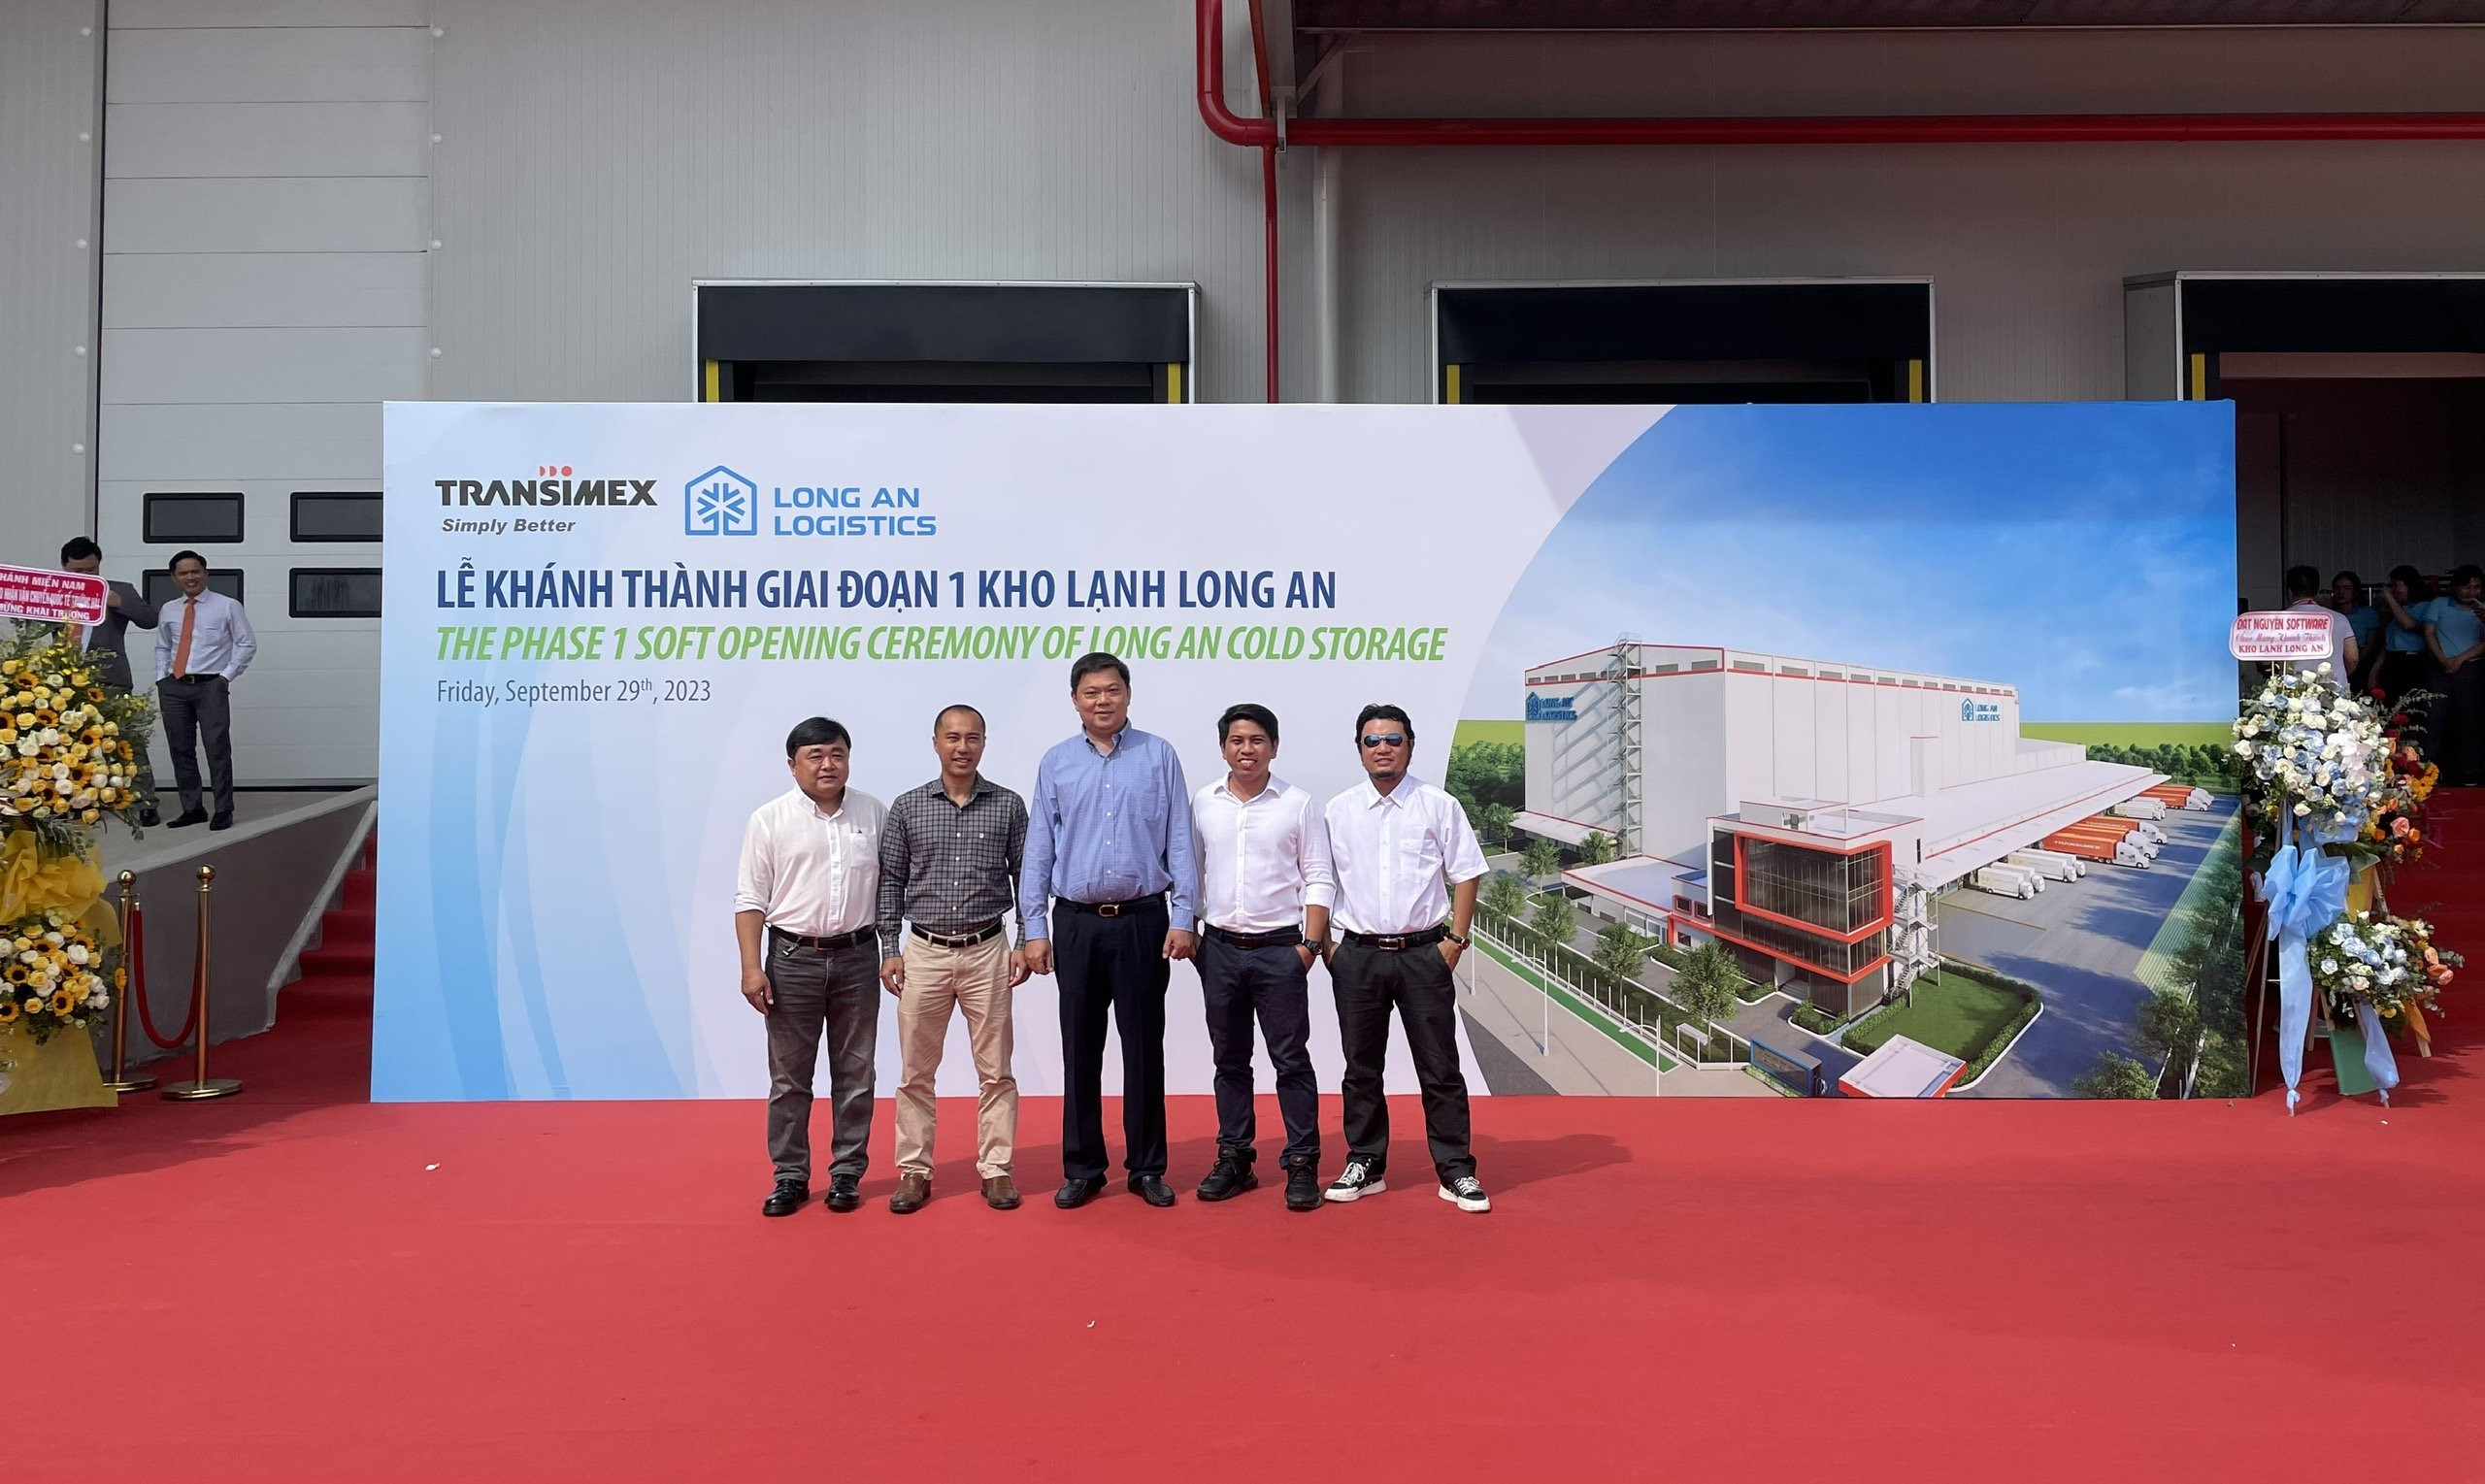 OPENING CEREMONY OF LONG AN COLD STORAGE PROJECT PHASE 1